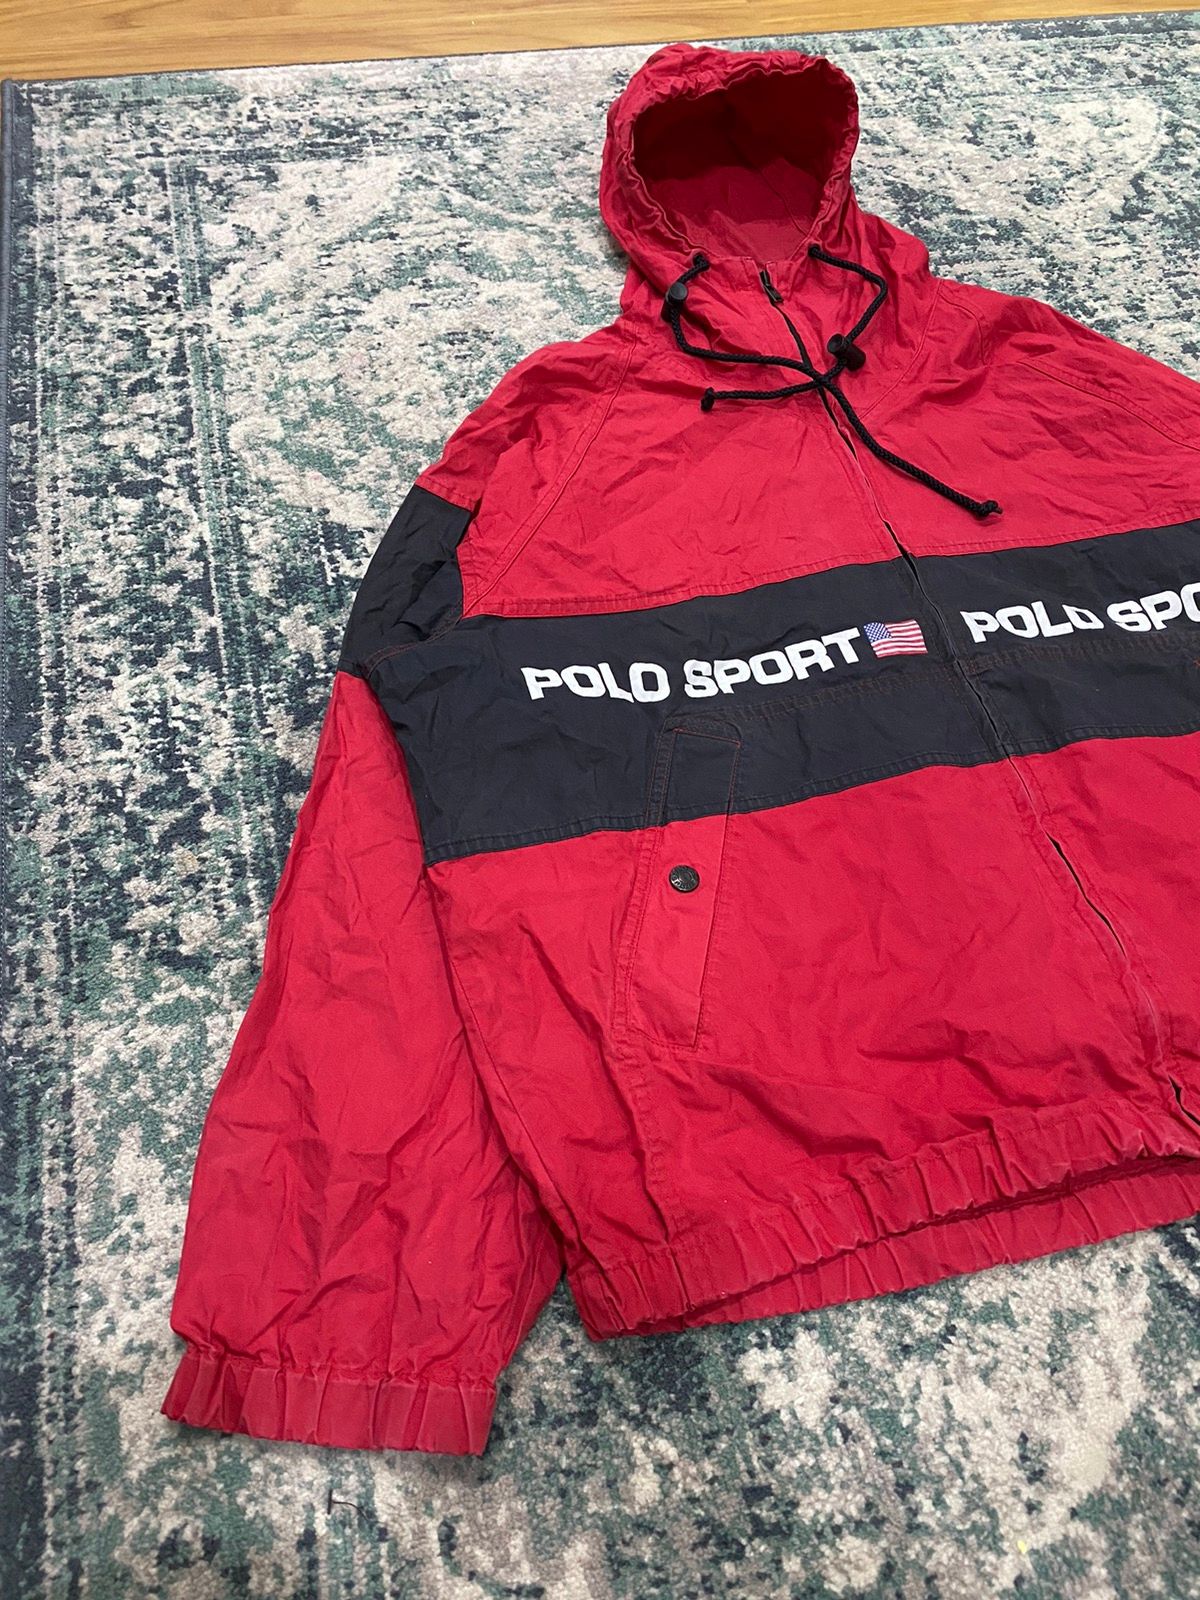 Vintage Polo Sport Ralph Lauren Spell Out Jacket - 2